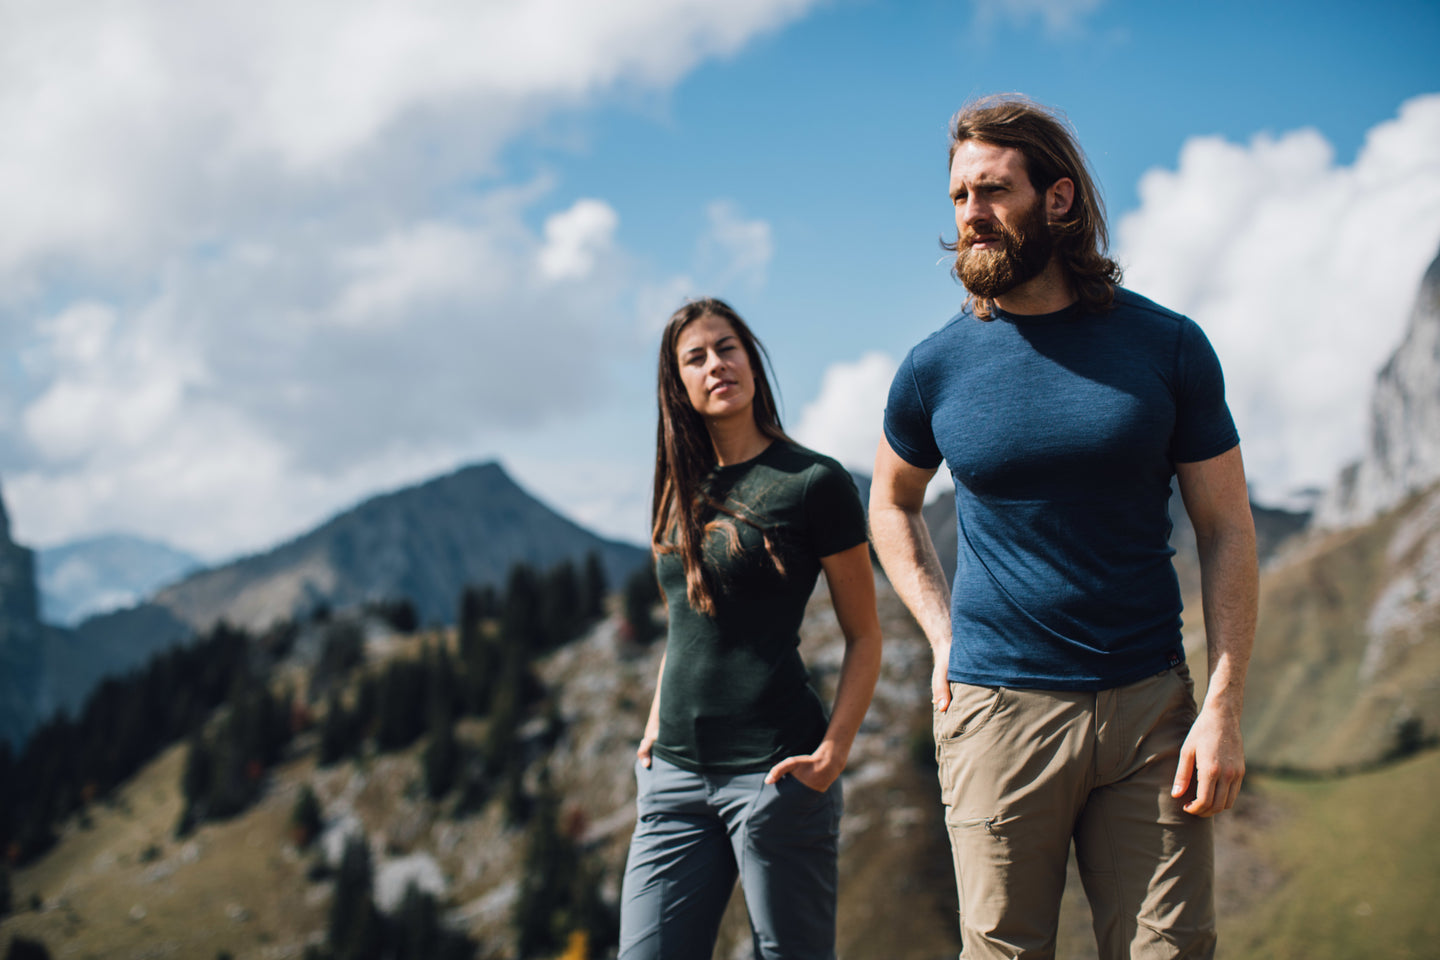 Man and woman standing in a mountain landscape, both wearing fitted Isobaa merino t-shirts